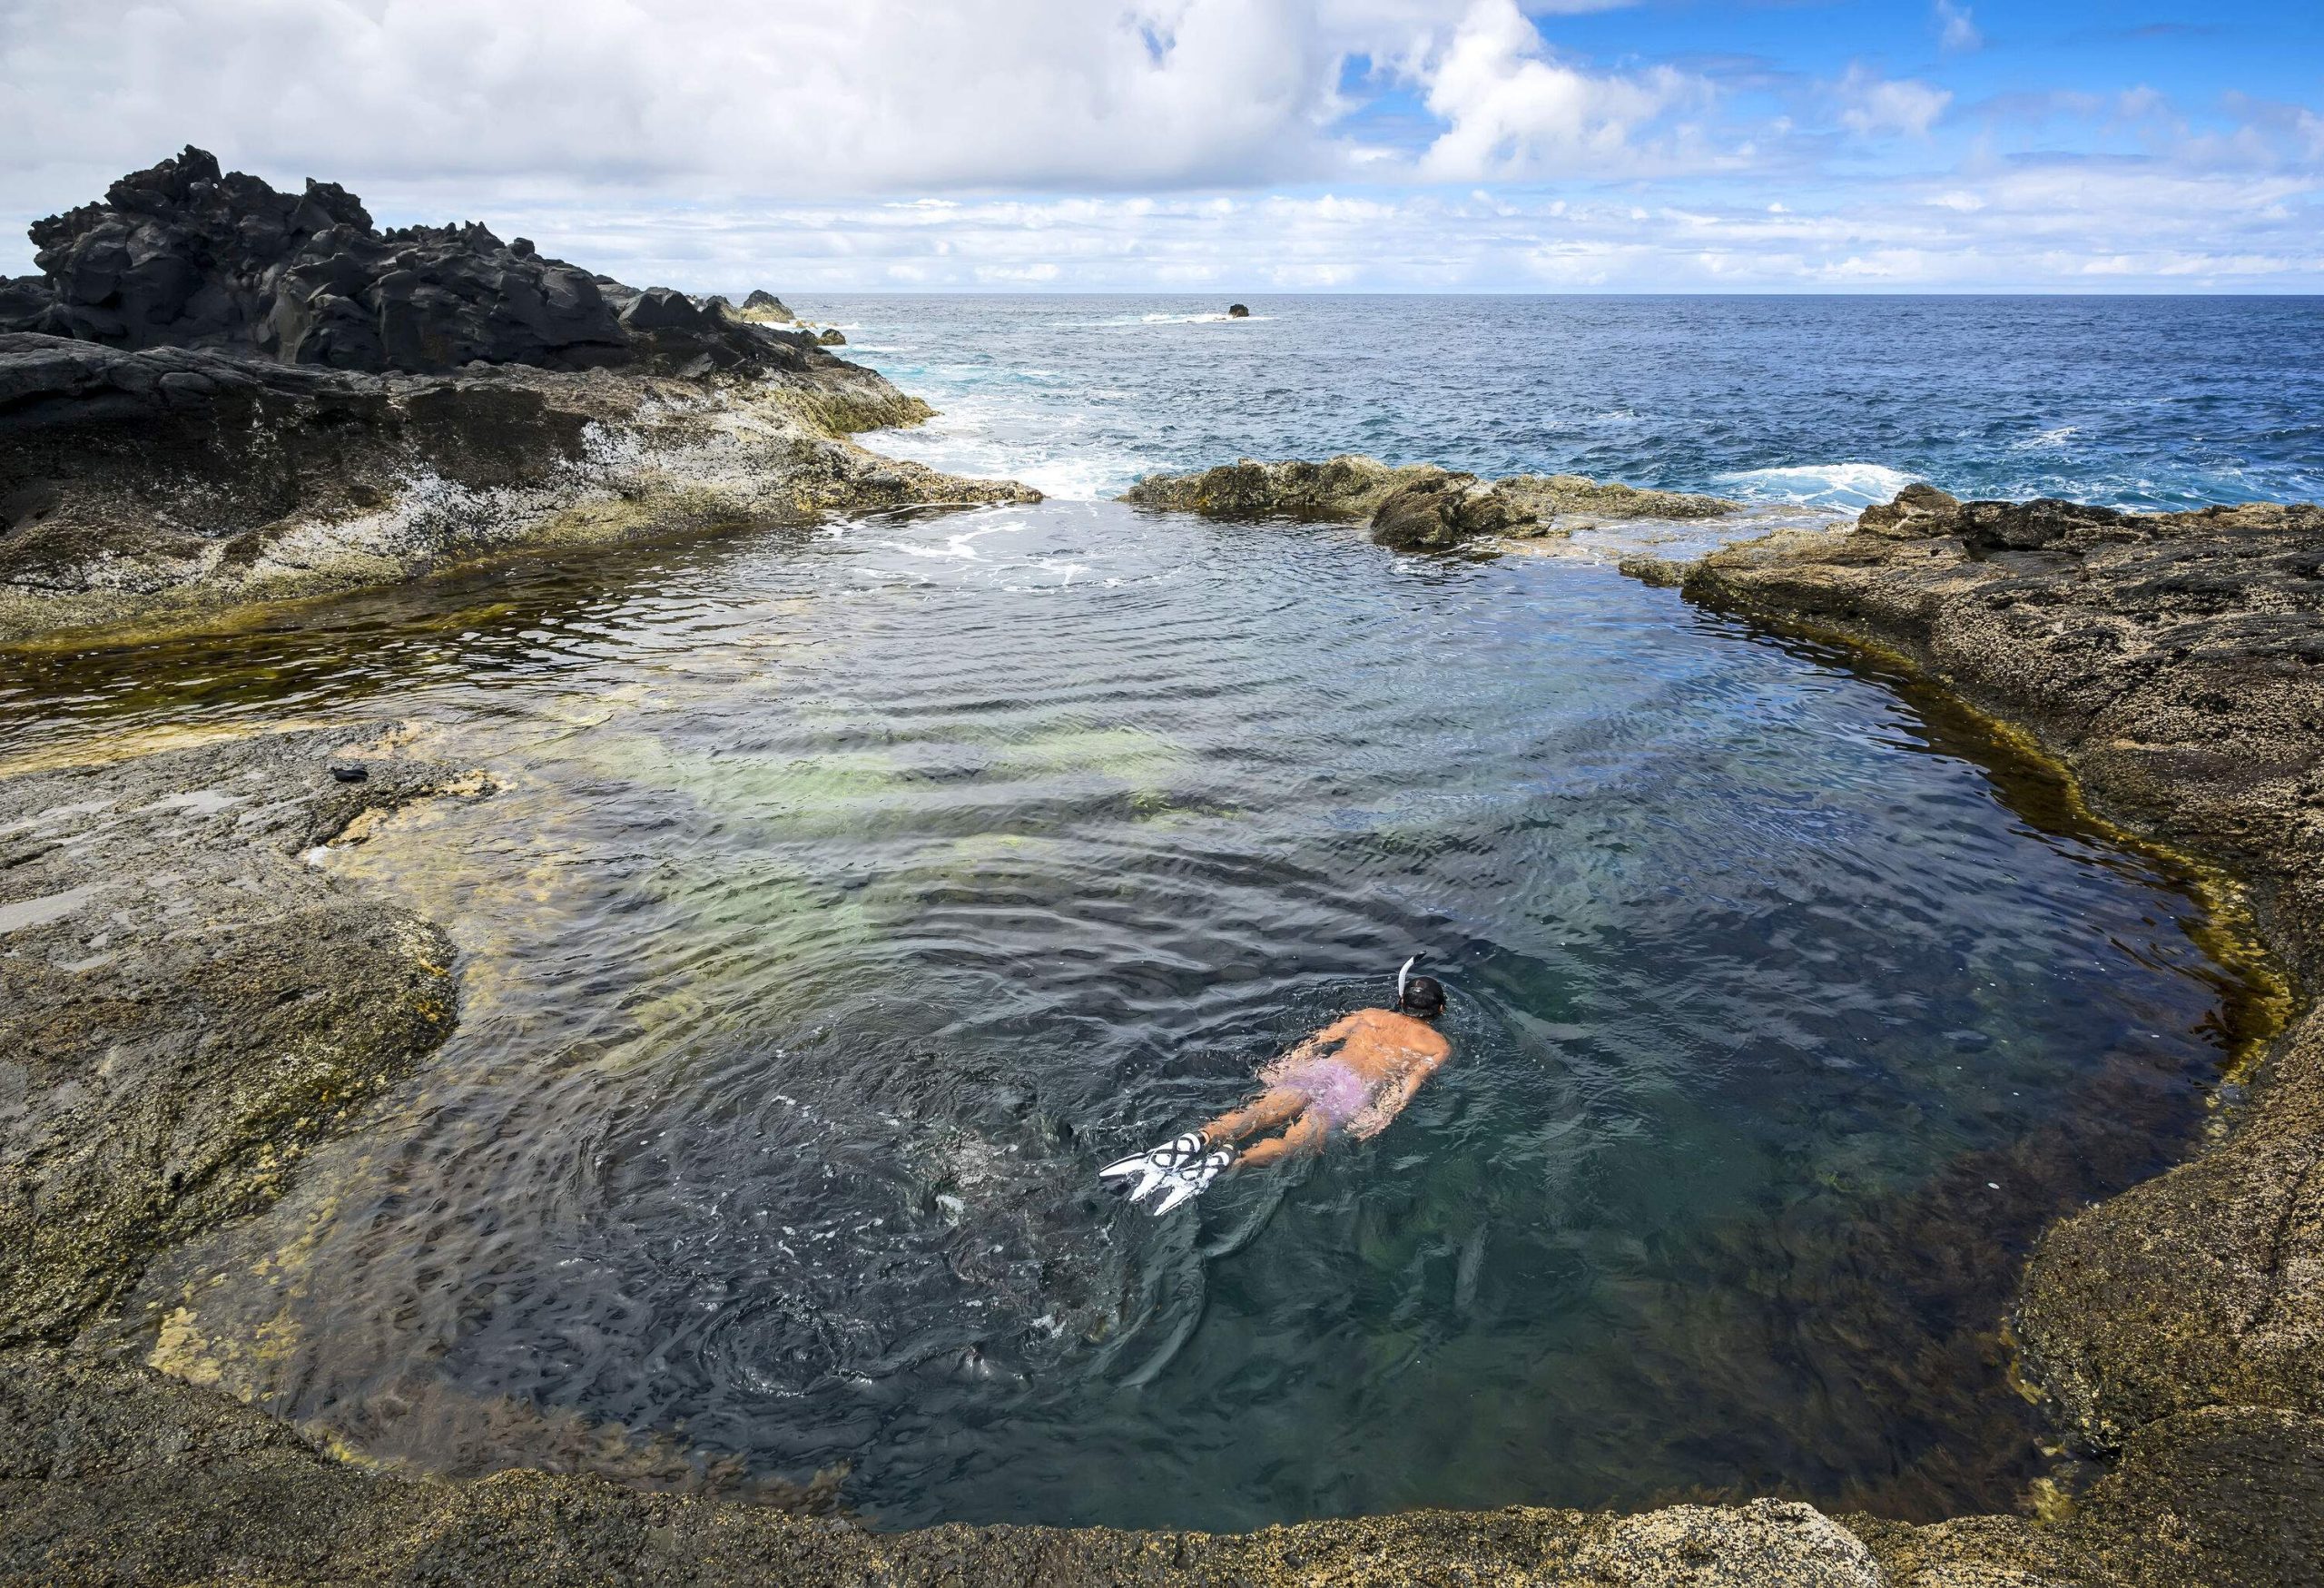 A man wearing a snorkel mask and fins swimming in a natural rock pool at the seaside.